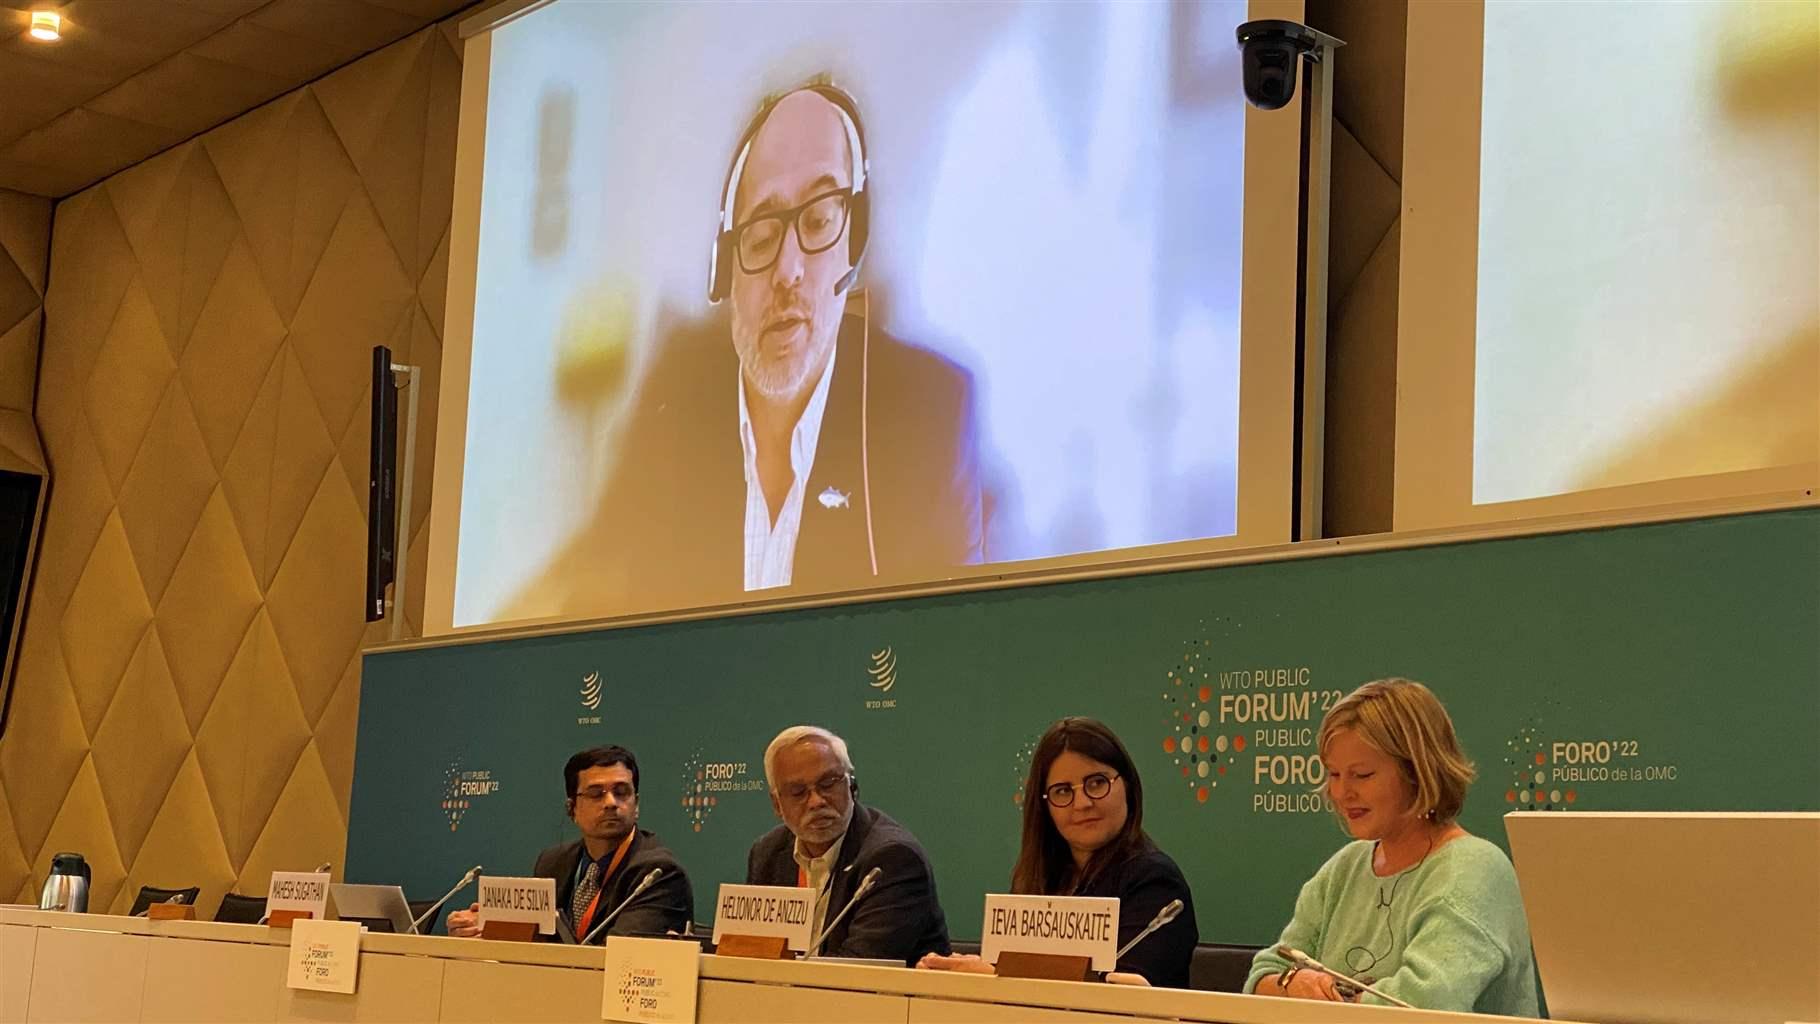 Pew senior officer Ernesto Fernandez Monge presenting at the plastics and trade panel discussion at the WTO Public Forum in Geneva, Switzerland in September 2022.